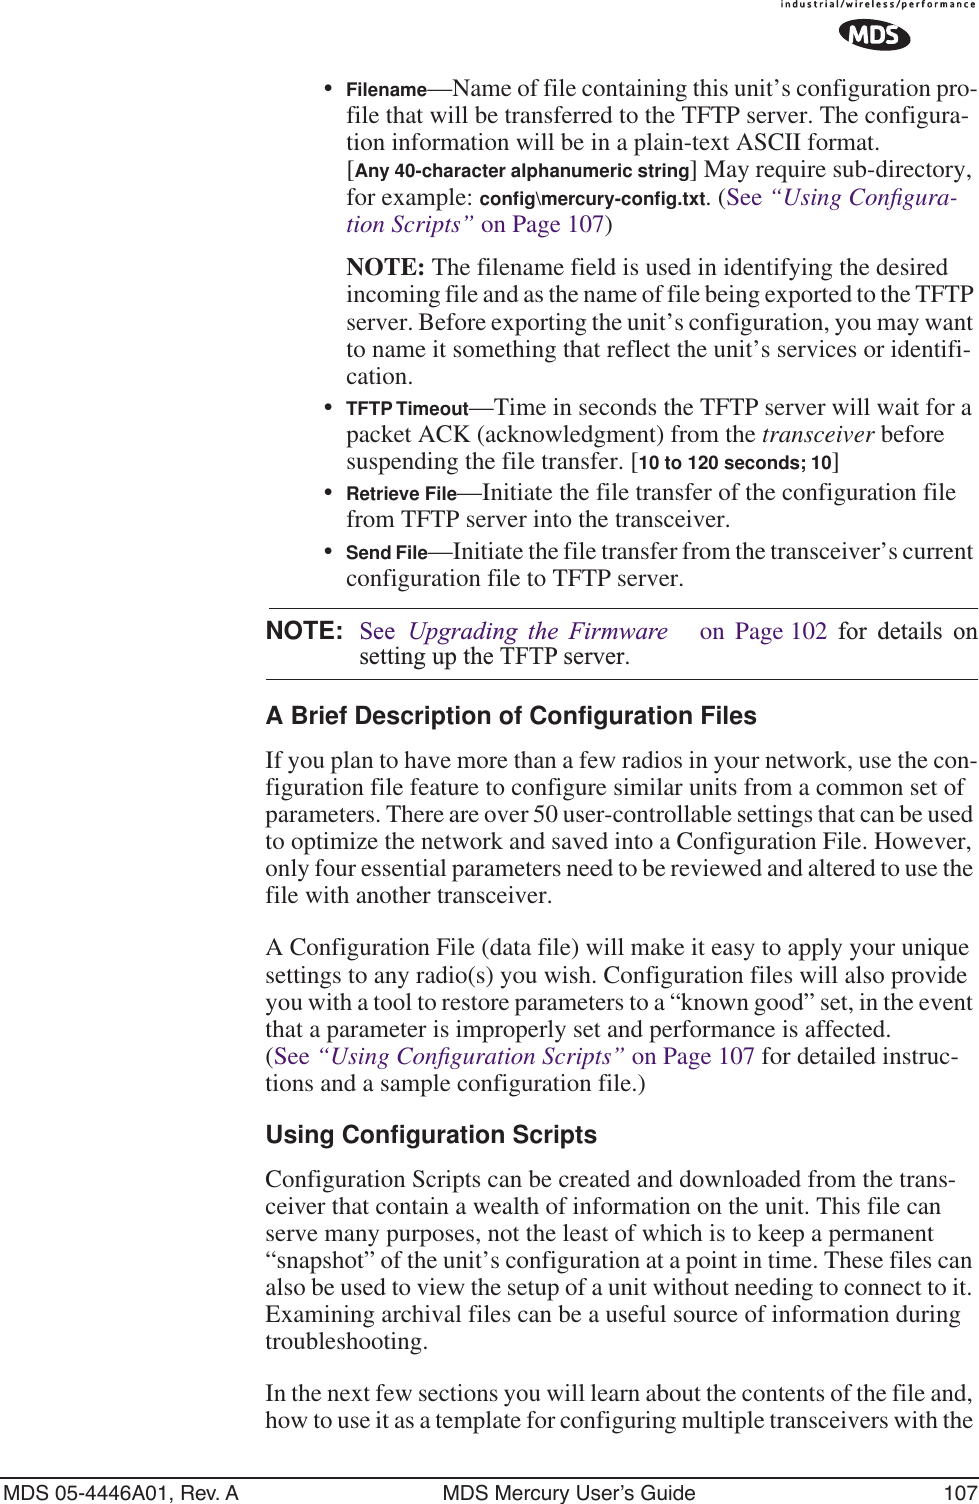 MDS 05-4446A01, Rev. A MDS Mercury User’s Guide 107•Filename—Name of file containing this unit’s configuration pro-file that will be transferred to the TFTP server. The configura-tion information will be in a plain-text ASCII format.[Any 40-character alphanumeric string] May require sub-directory, for example: conﬁg\mercury-conﬁg.txt. (See “Using Conﬁgura-tion Scripts” on Page 107)NOTE: The filename field is used in identifying the desired incoming file and as the name of file being exported to the TFTP server. Before exporting the unit’s configuration, you may want to name it something that reflect the unit’s services or identifi-cation.•TFTP Timeout—Time in seconds the TFTP server will wait for a packet ACK (acknowledgment) from the transceiver before suspending the file transfer. [10 to 120 seconds; 10]•Retrieve File—Initiate the file transfer of the configuration file from TFTP server into the transceiver.•Send File—Initiate the file transfer from the transceiver’s current configuration file to TFTP server.NOTE: See  Upgrading the Firmware   on Page 102 for details onsetting up the TFTP server.A Brief Description of Configuration FilesIf you plan to have more than a few radios in your network, use the con-figuration file feature to configure similar units from a common set of parameters. There are over 50 user-controllable settings that can be used to optimize the network and saved into a Configuration File. However, only four essential parameters need to be reviewed and altered to use the file with another transceiver. A Configuration File (data file) will make it easy to apply your unique settings to any radio(s) you wish. Configuration files will also provide you with a tool to restore parameters to a “known good” set, in the event that a parameter is improperly set and performance is affected. (See “Using Conﬁguration Scripts” on Page 107 for detailed instruc-tions and a sample configuration file.)Using Configuration ScriptsConfiguration Scripts can be created and downloaded from the trans-ceiver that contain a wealth of information on the unit. This file can serve many purposes, not the least of which is to keep a permanent “snapshot” of the unit’s configuration at a point in time. These files can also be used to view the setup of a unit without needing to connect to it. Examining archival files can be a useful source of information during troubleshooting.In the next few sections you will learn about the contents of the file and, how to use it as a template for configuring multiple transceivers with the 